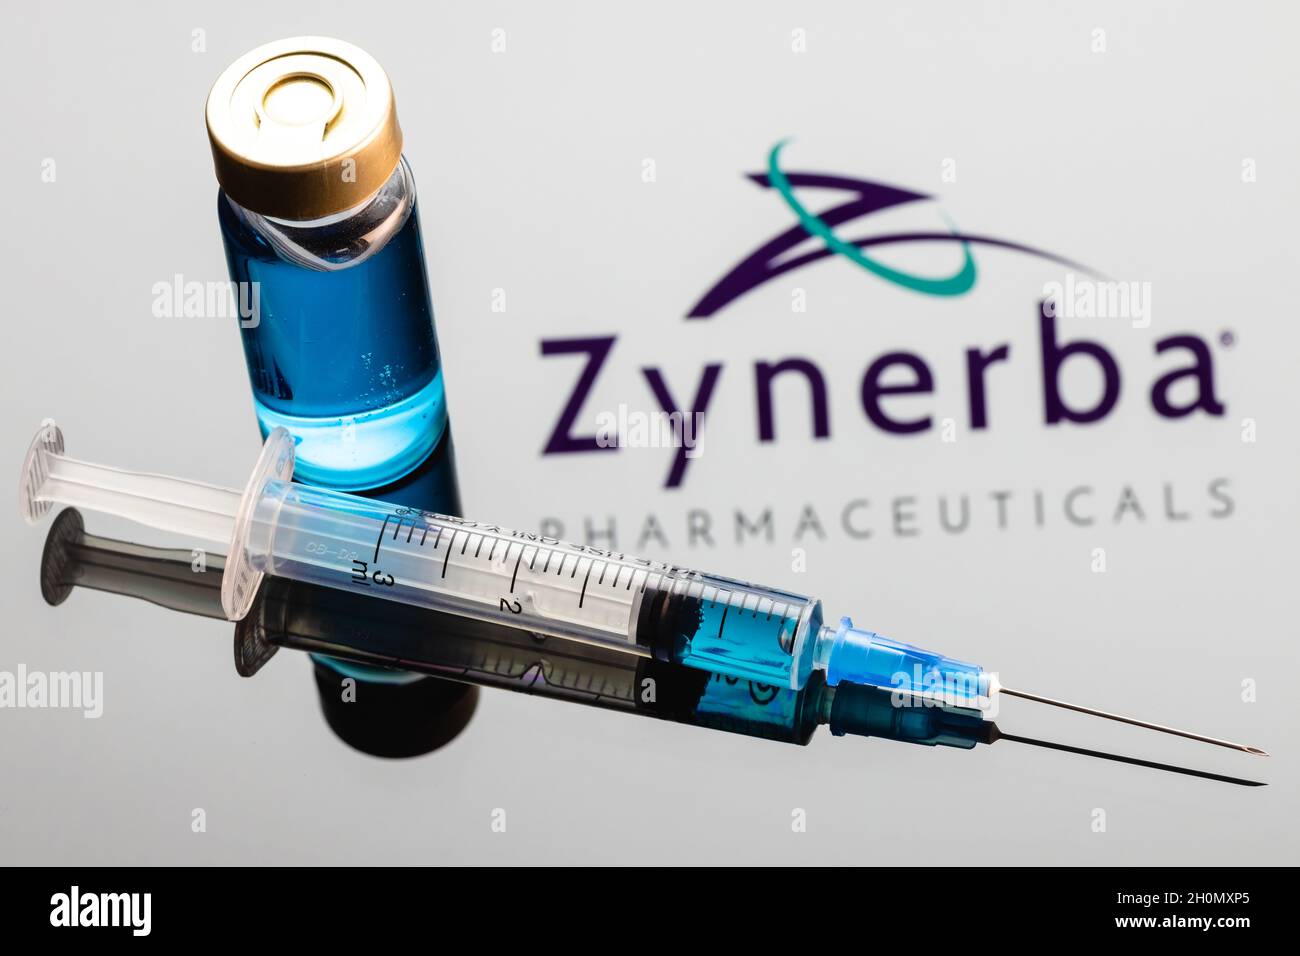 Zynerba Pharmaceuticals is specialty pharmaceutical company, focuses on  developing transdermal cannabinoid therapies Stock Photo - Alamy